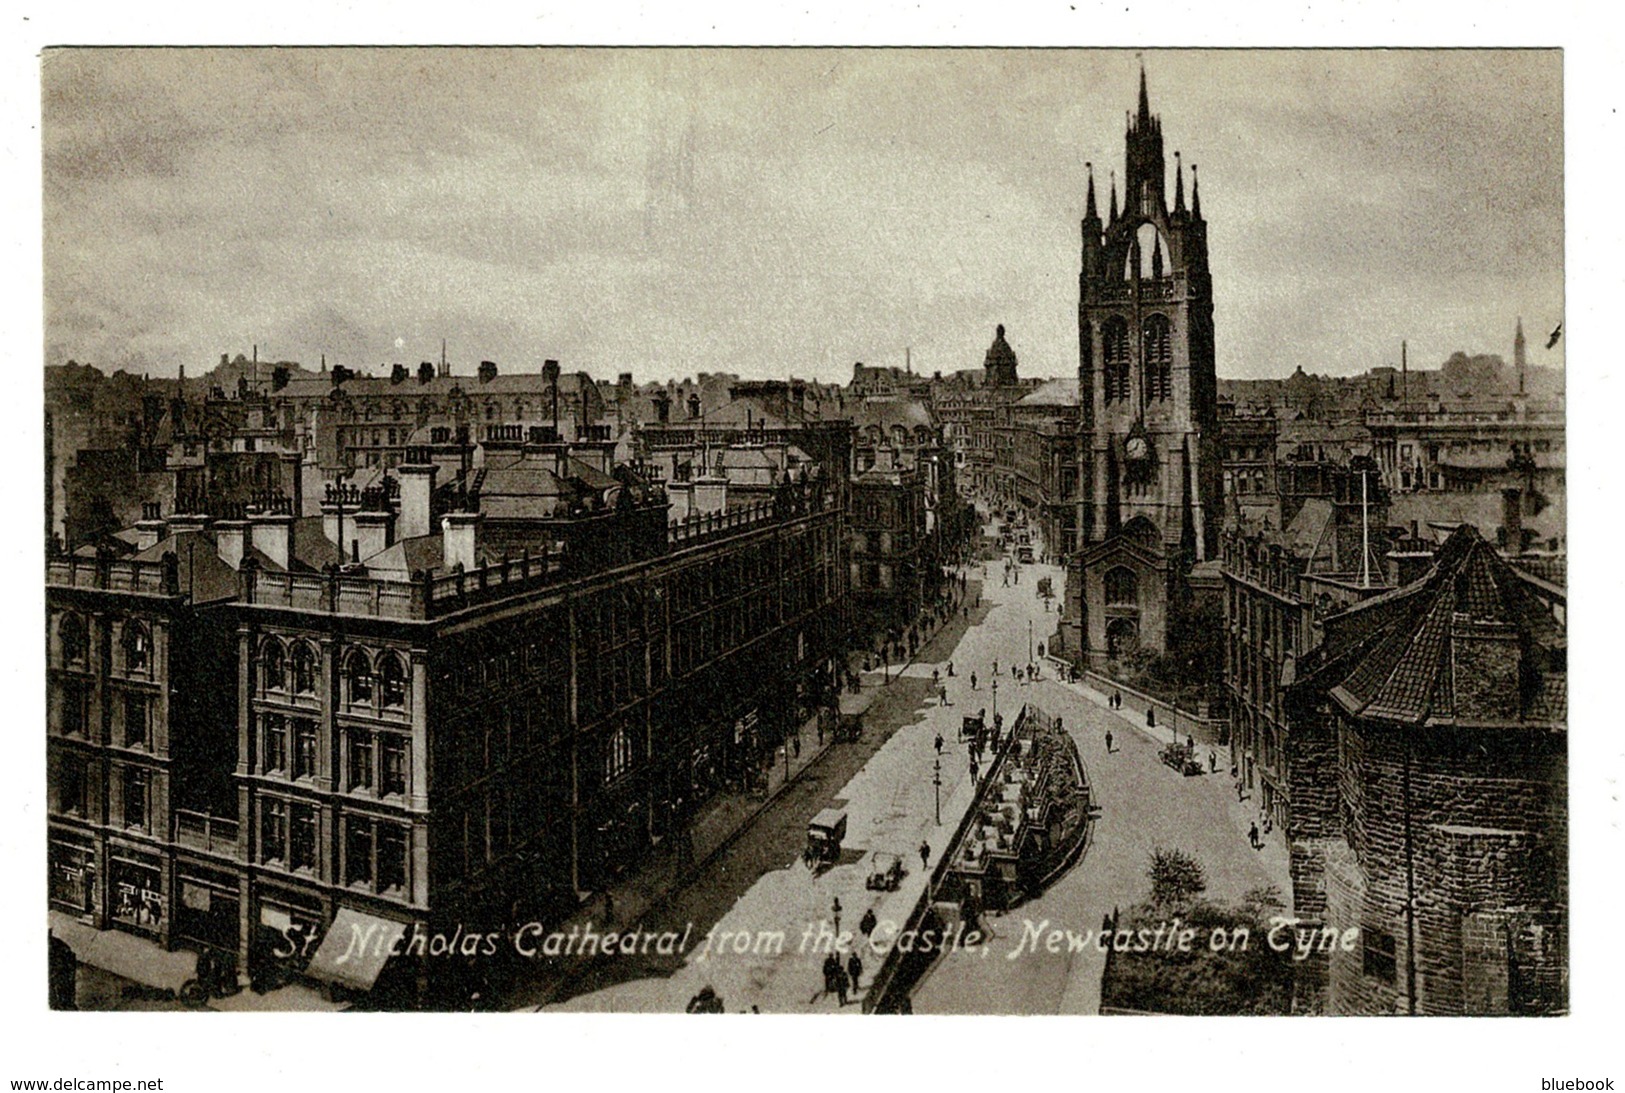 Ref 1363 - 1916 WWI Postcard - Nicholas Cathedral From The Castle - Newcastle On Tyne - Northumberland - Newcastle-upon-Tyne